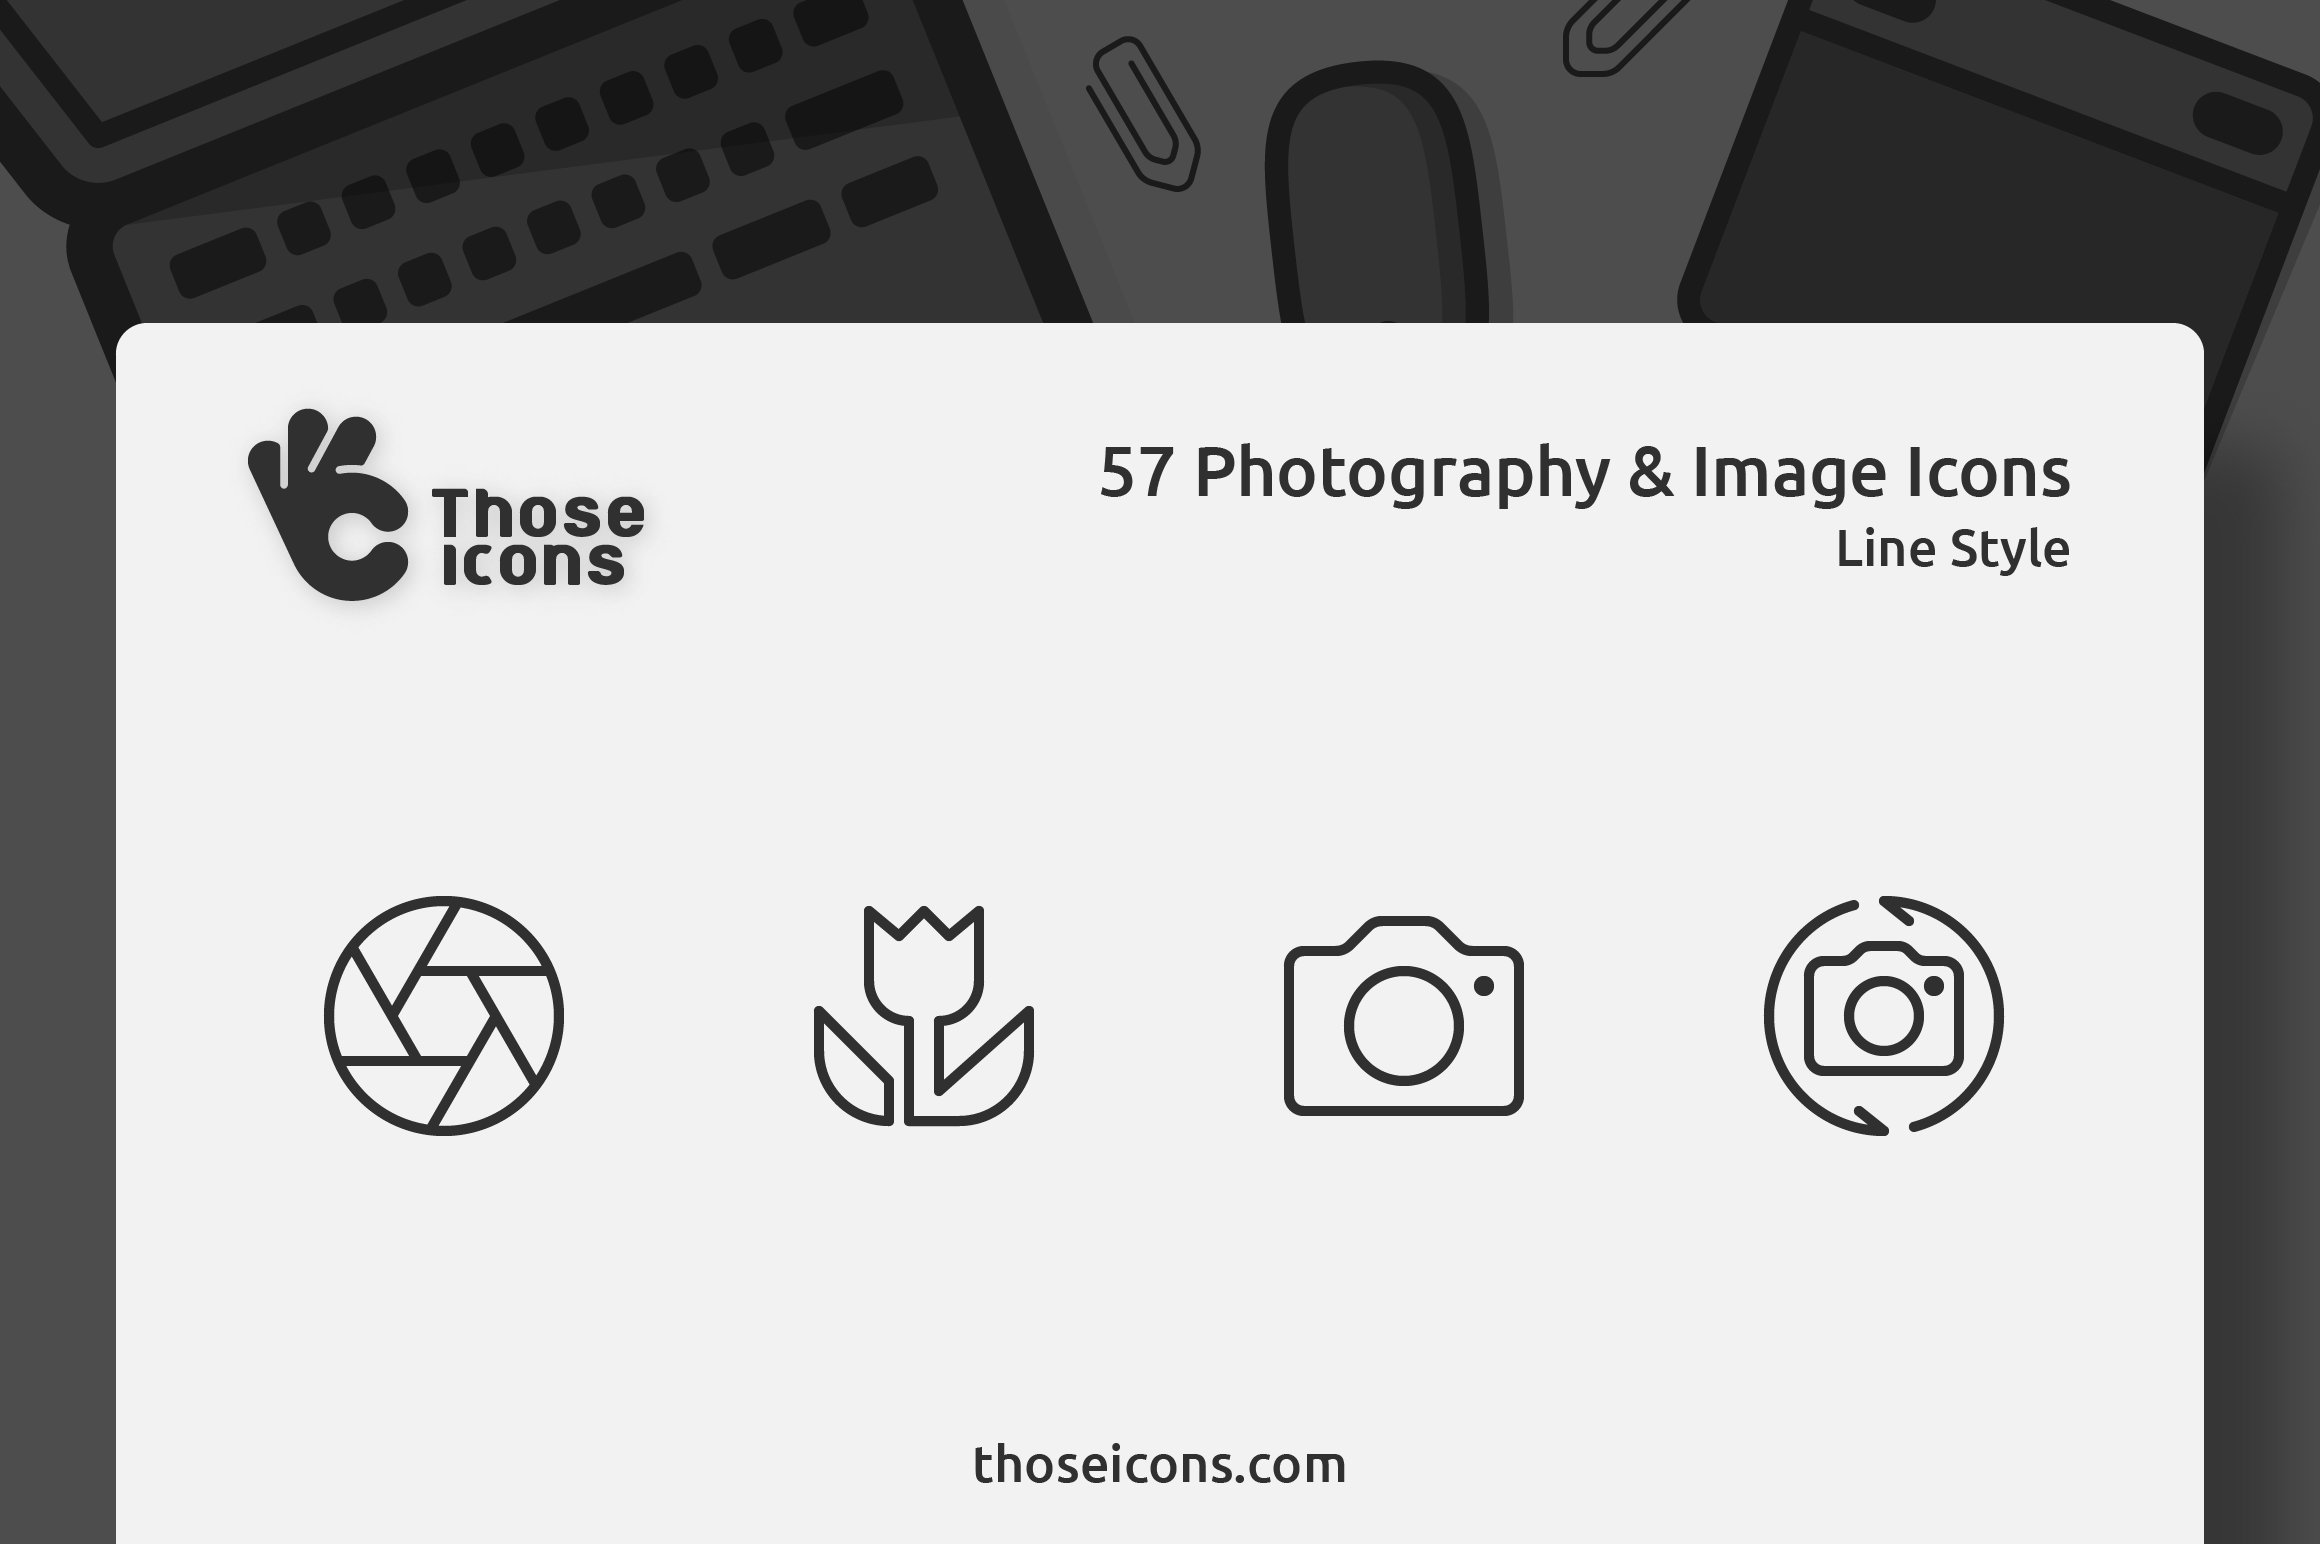 57 Photography & Image Line Icon cover image.